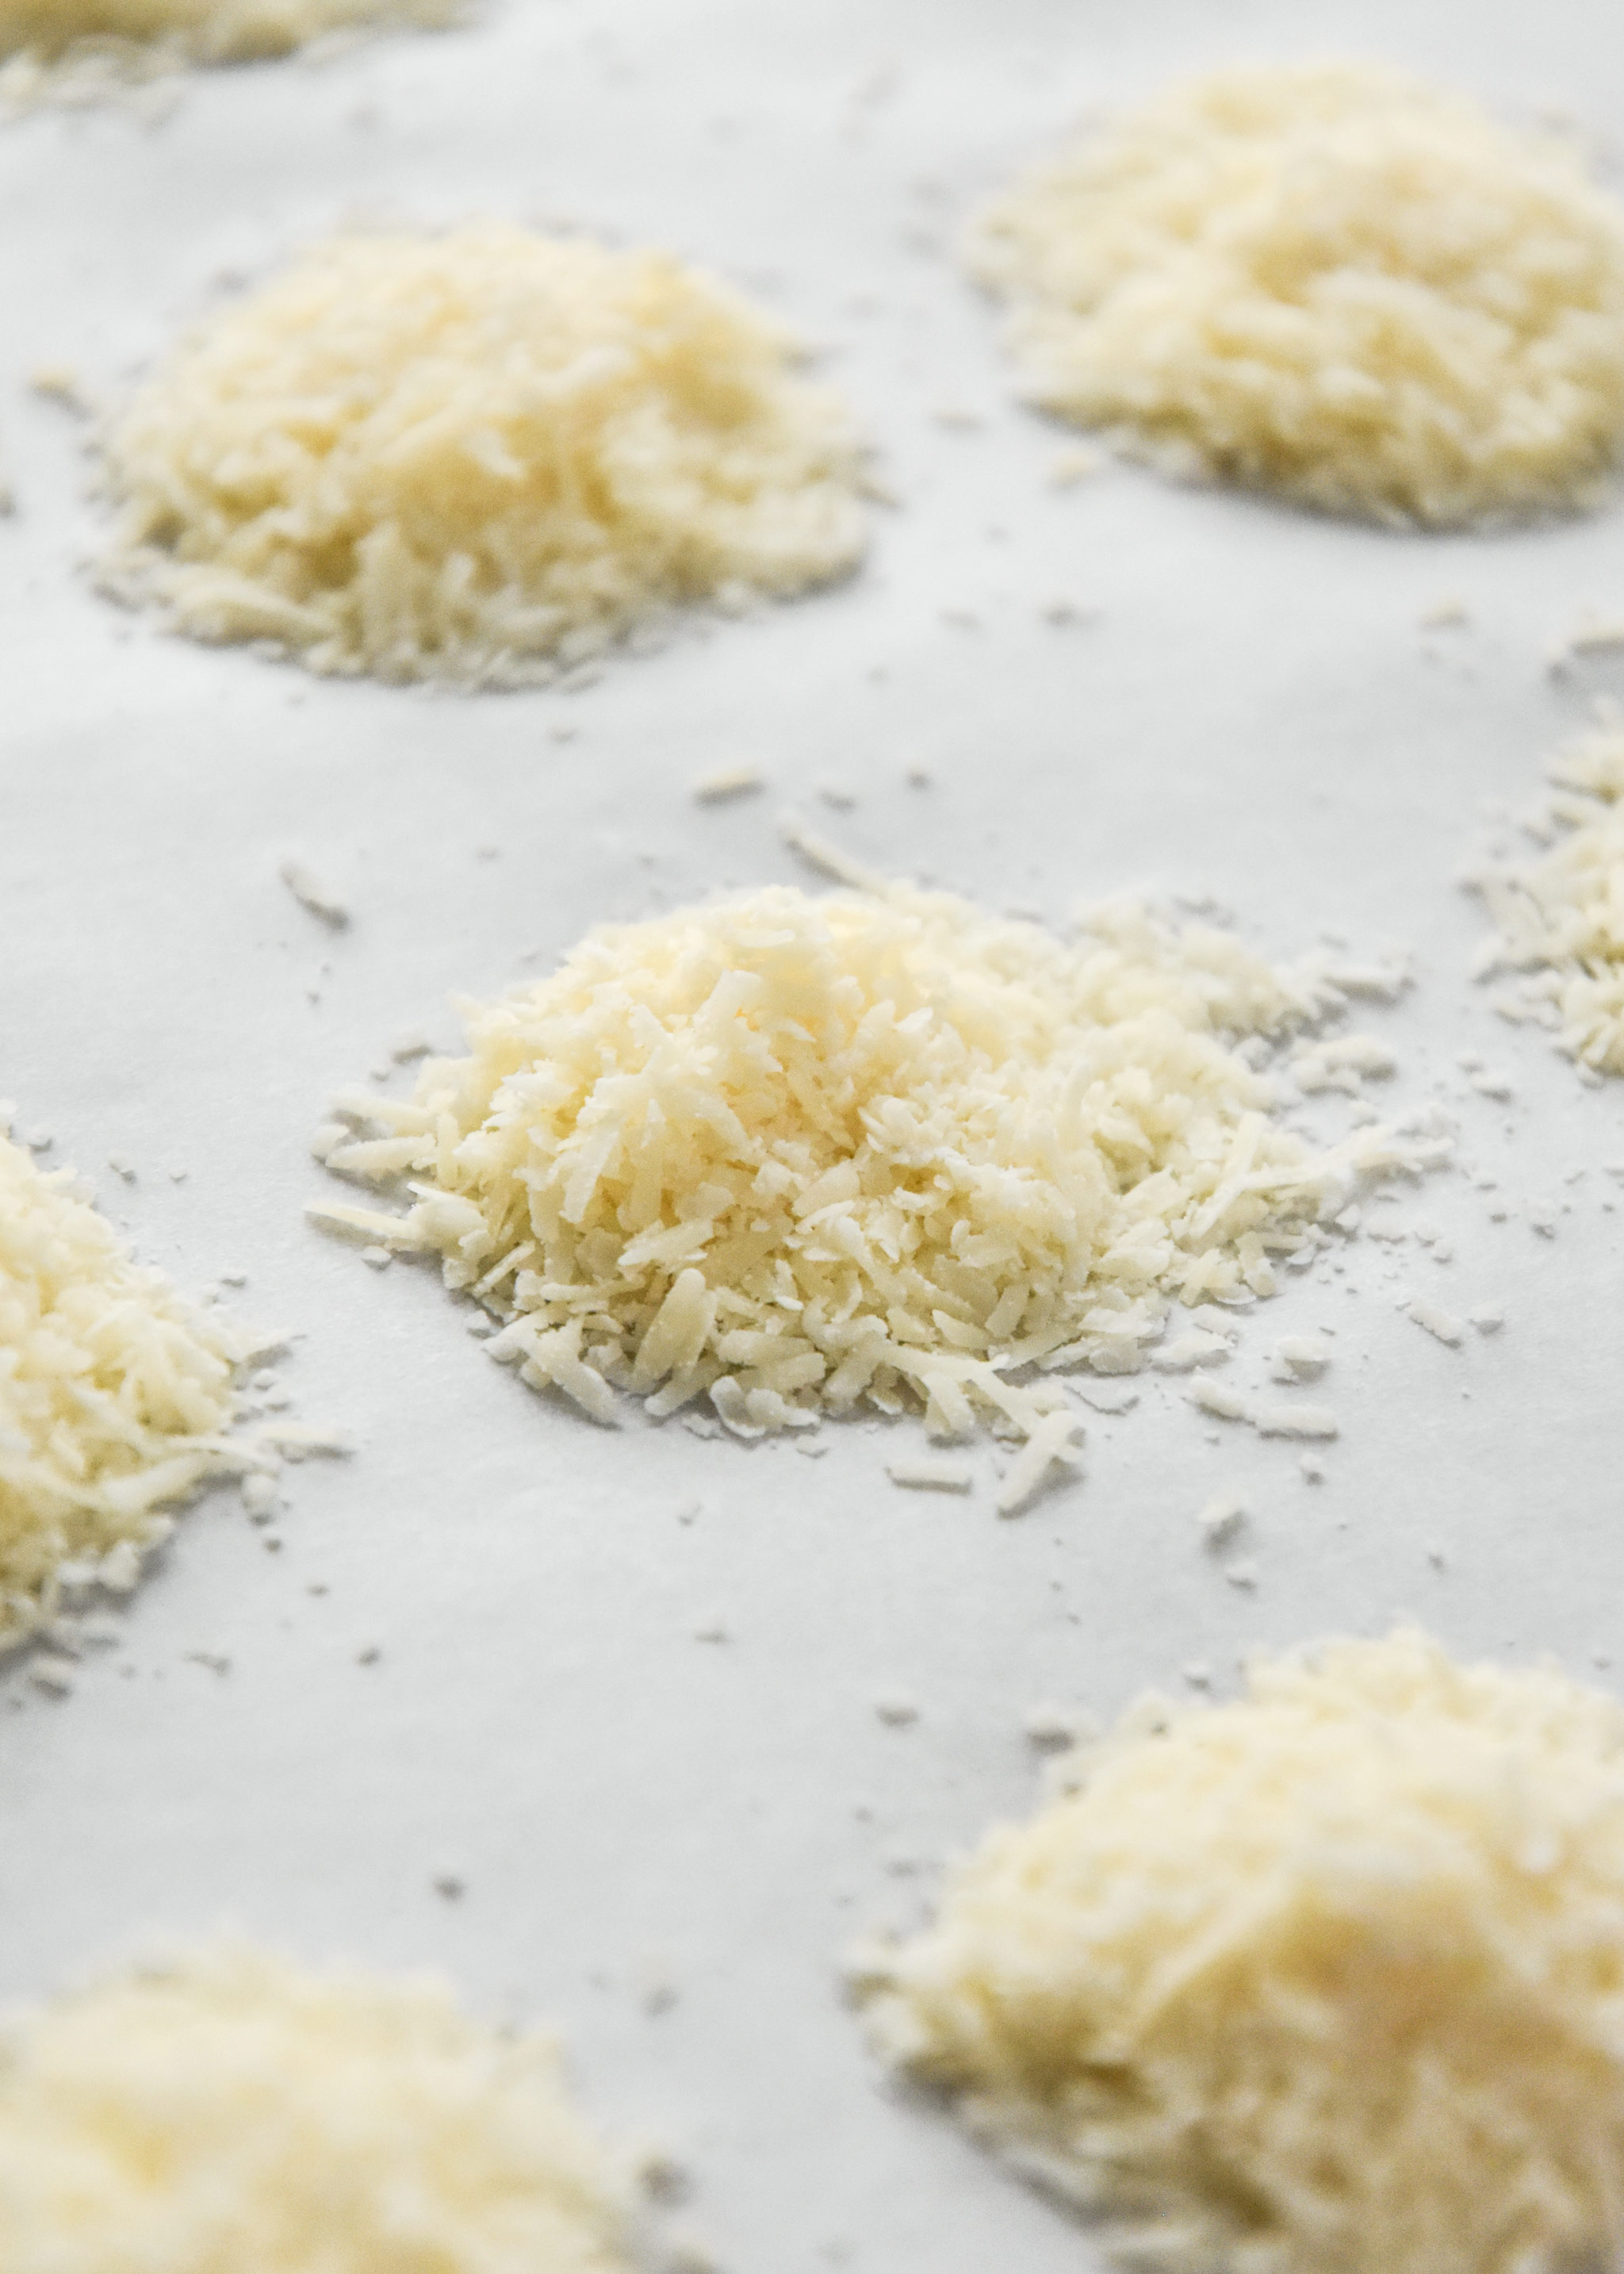 piles of parmesan cheese on a baking sheet